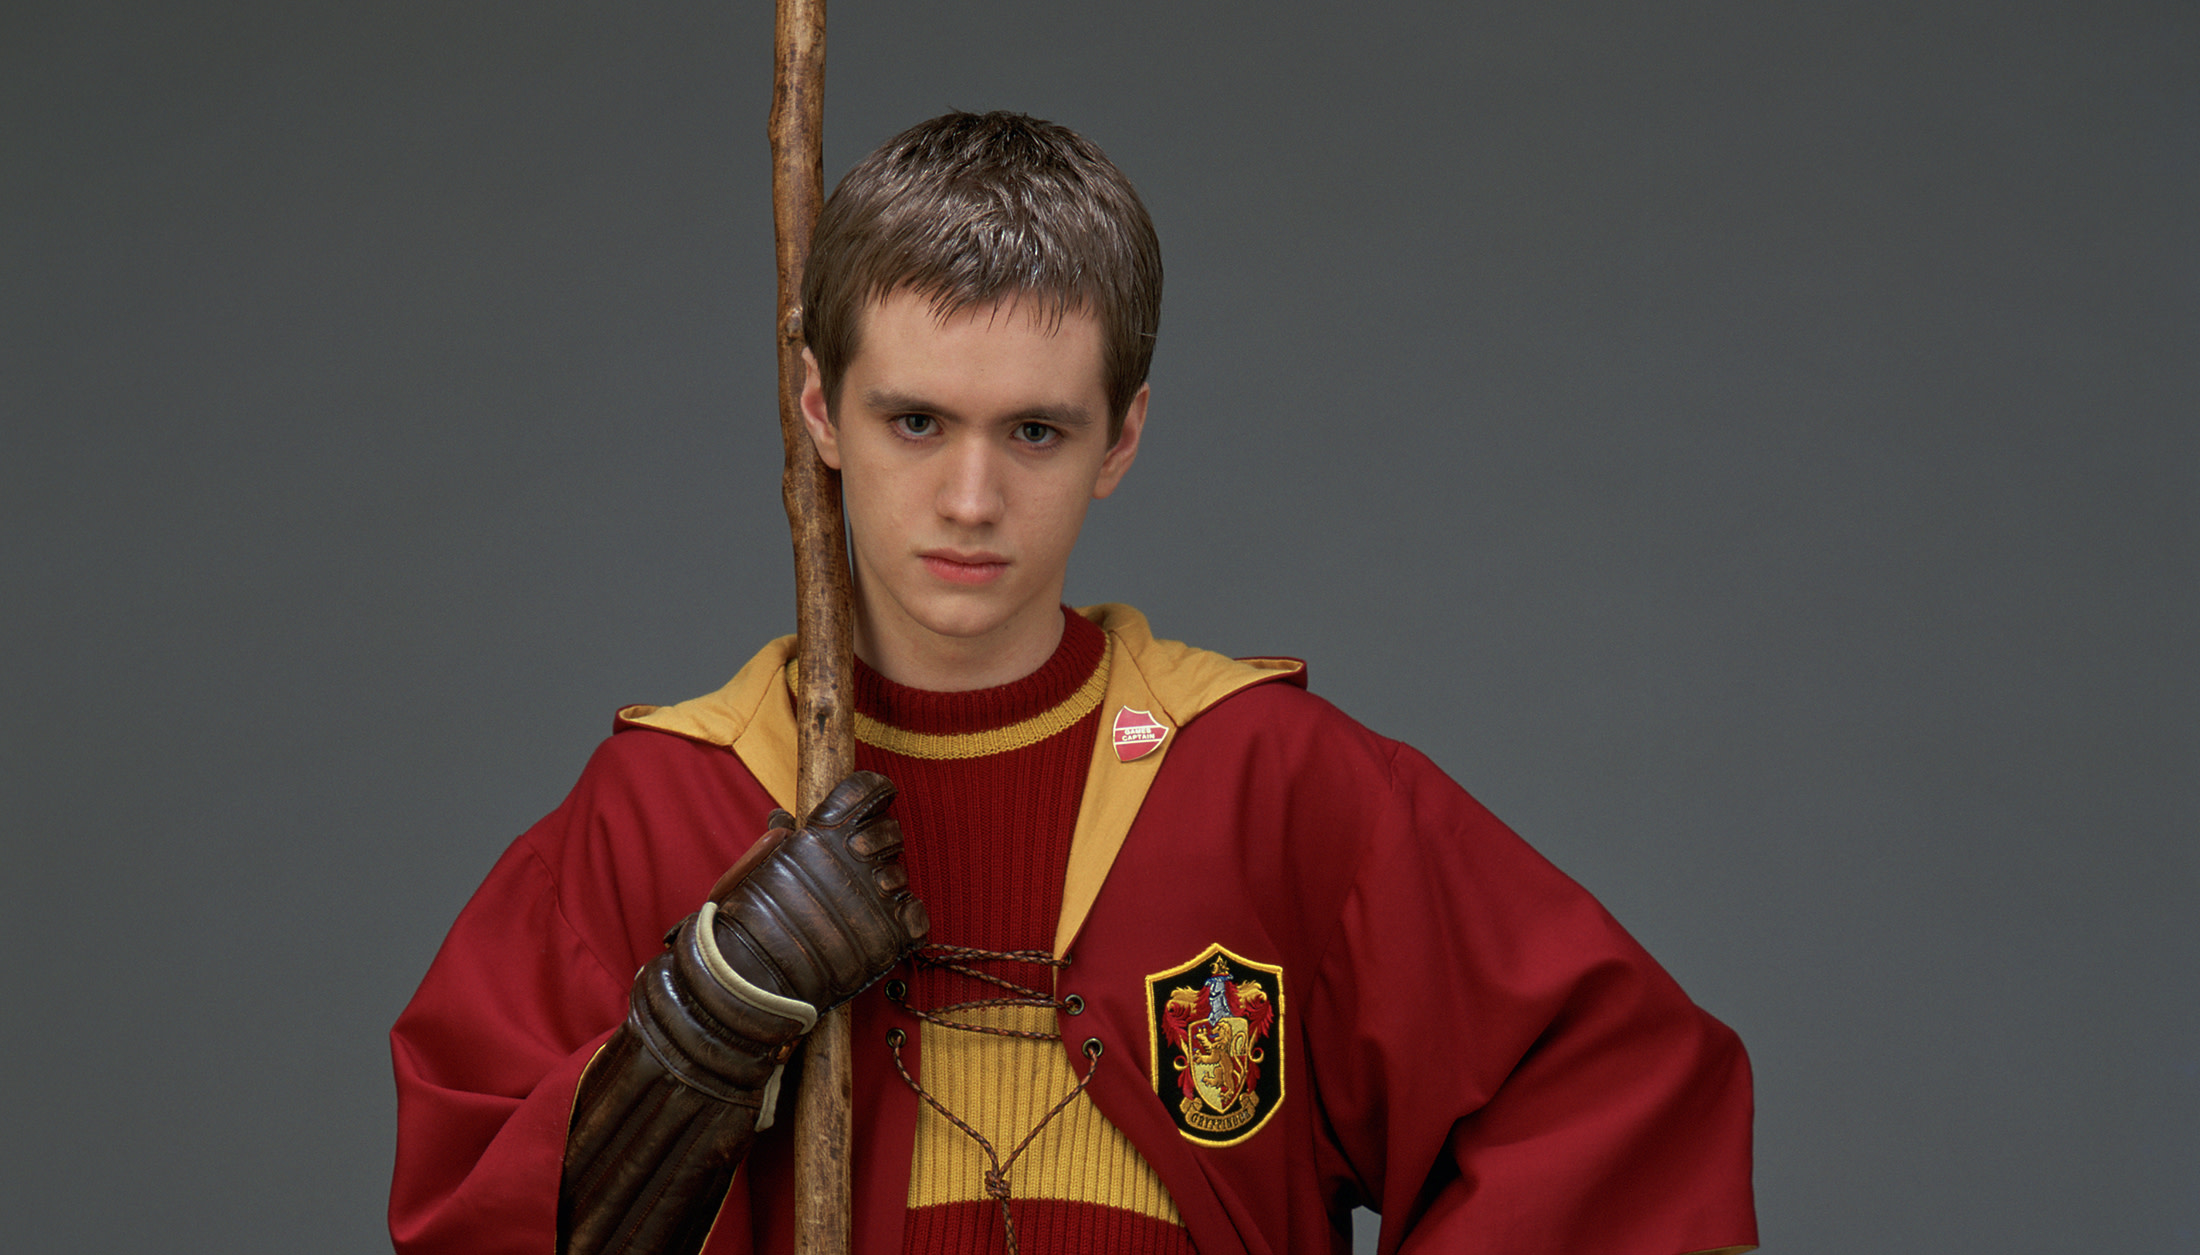 Enjoy an exclusive extract of Empire magazine's interview with Sean Biggerstaff | Wizarding World